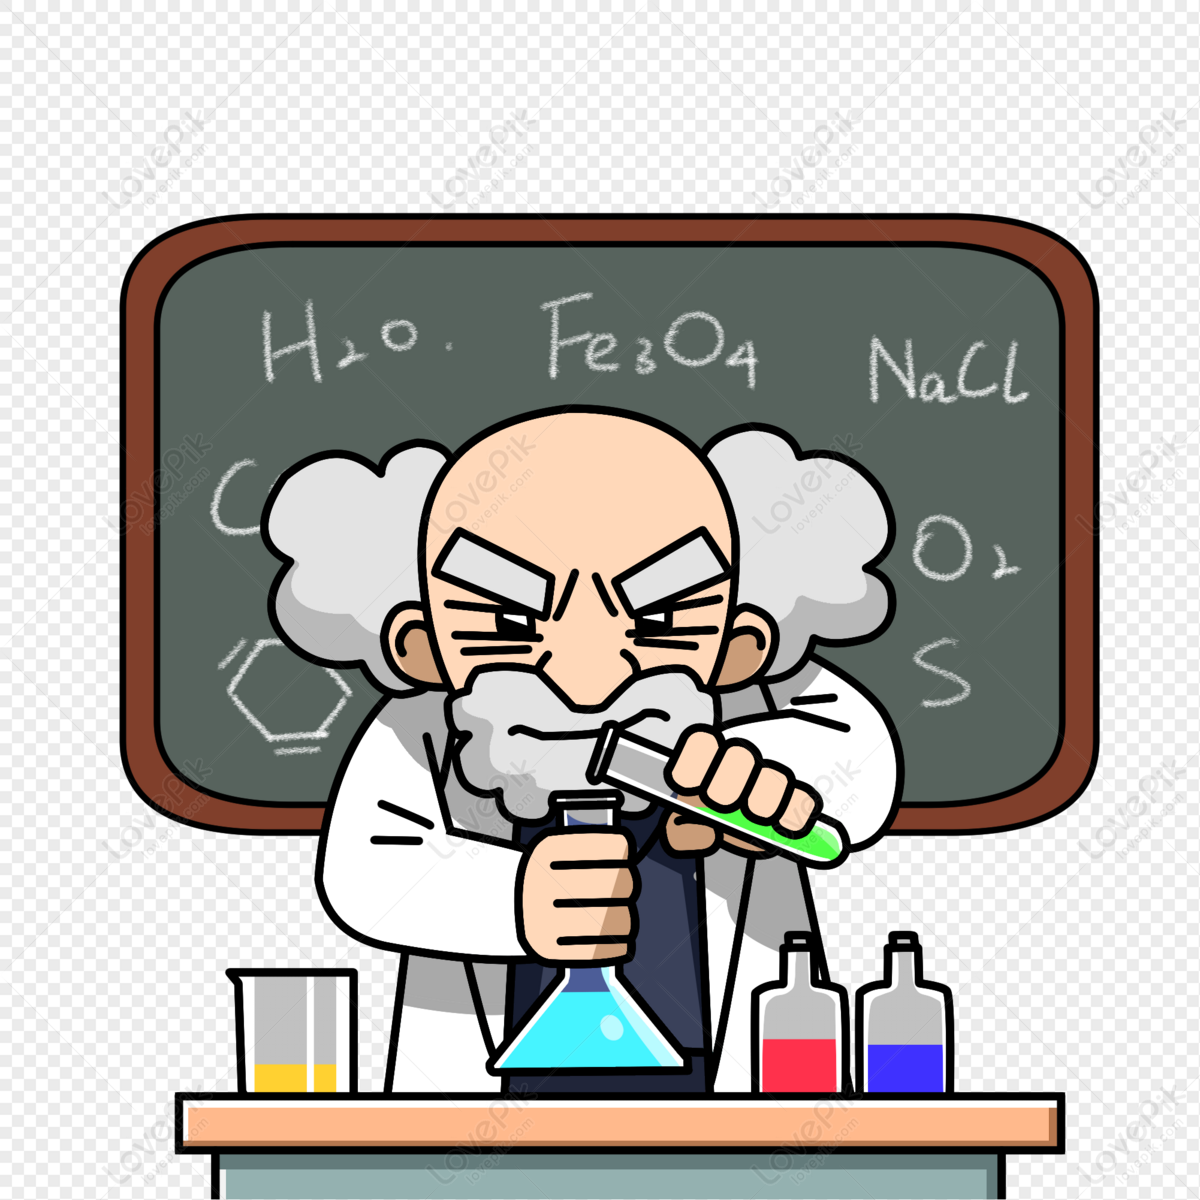 Chemistry Teacher Attending Class PNG Picture And Clipart Image For Free  Download - Lovepik | 401499575